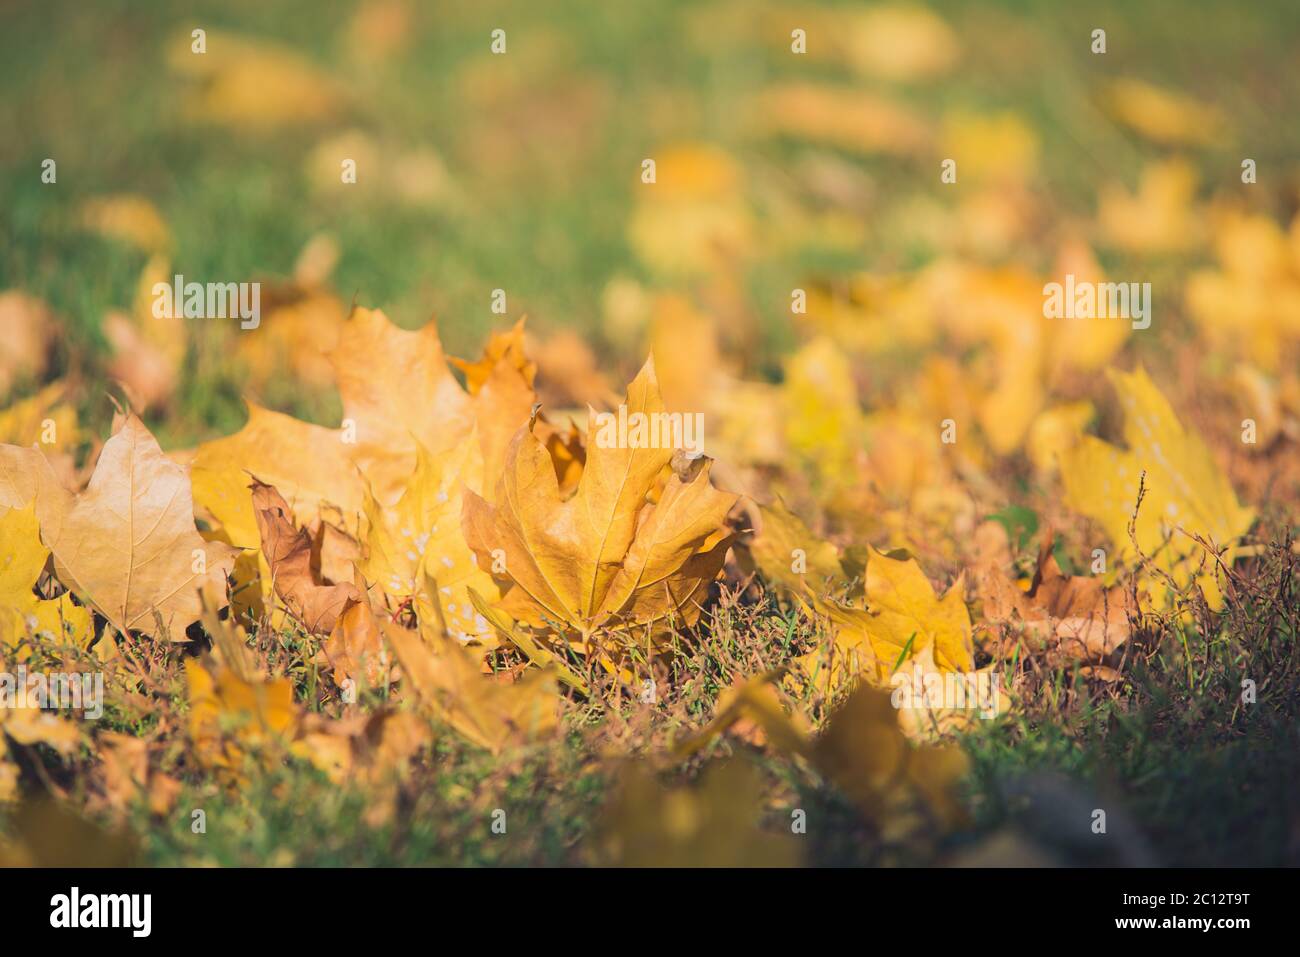 Yellow autumn Maple leaves on green grass. Bokeh blurred artistic background Stock Photo